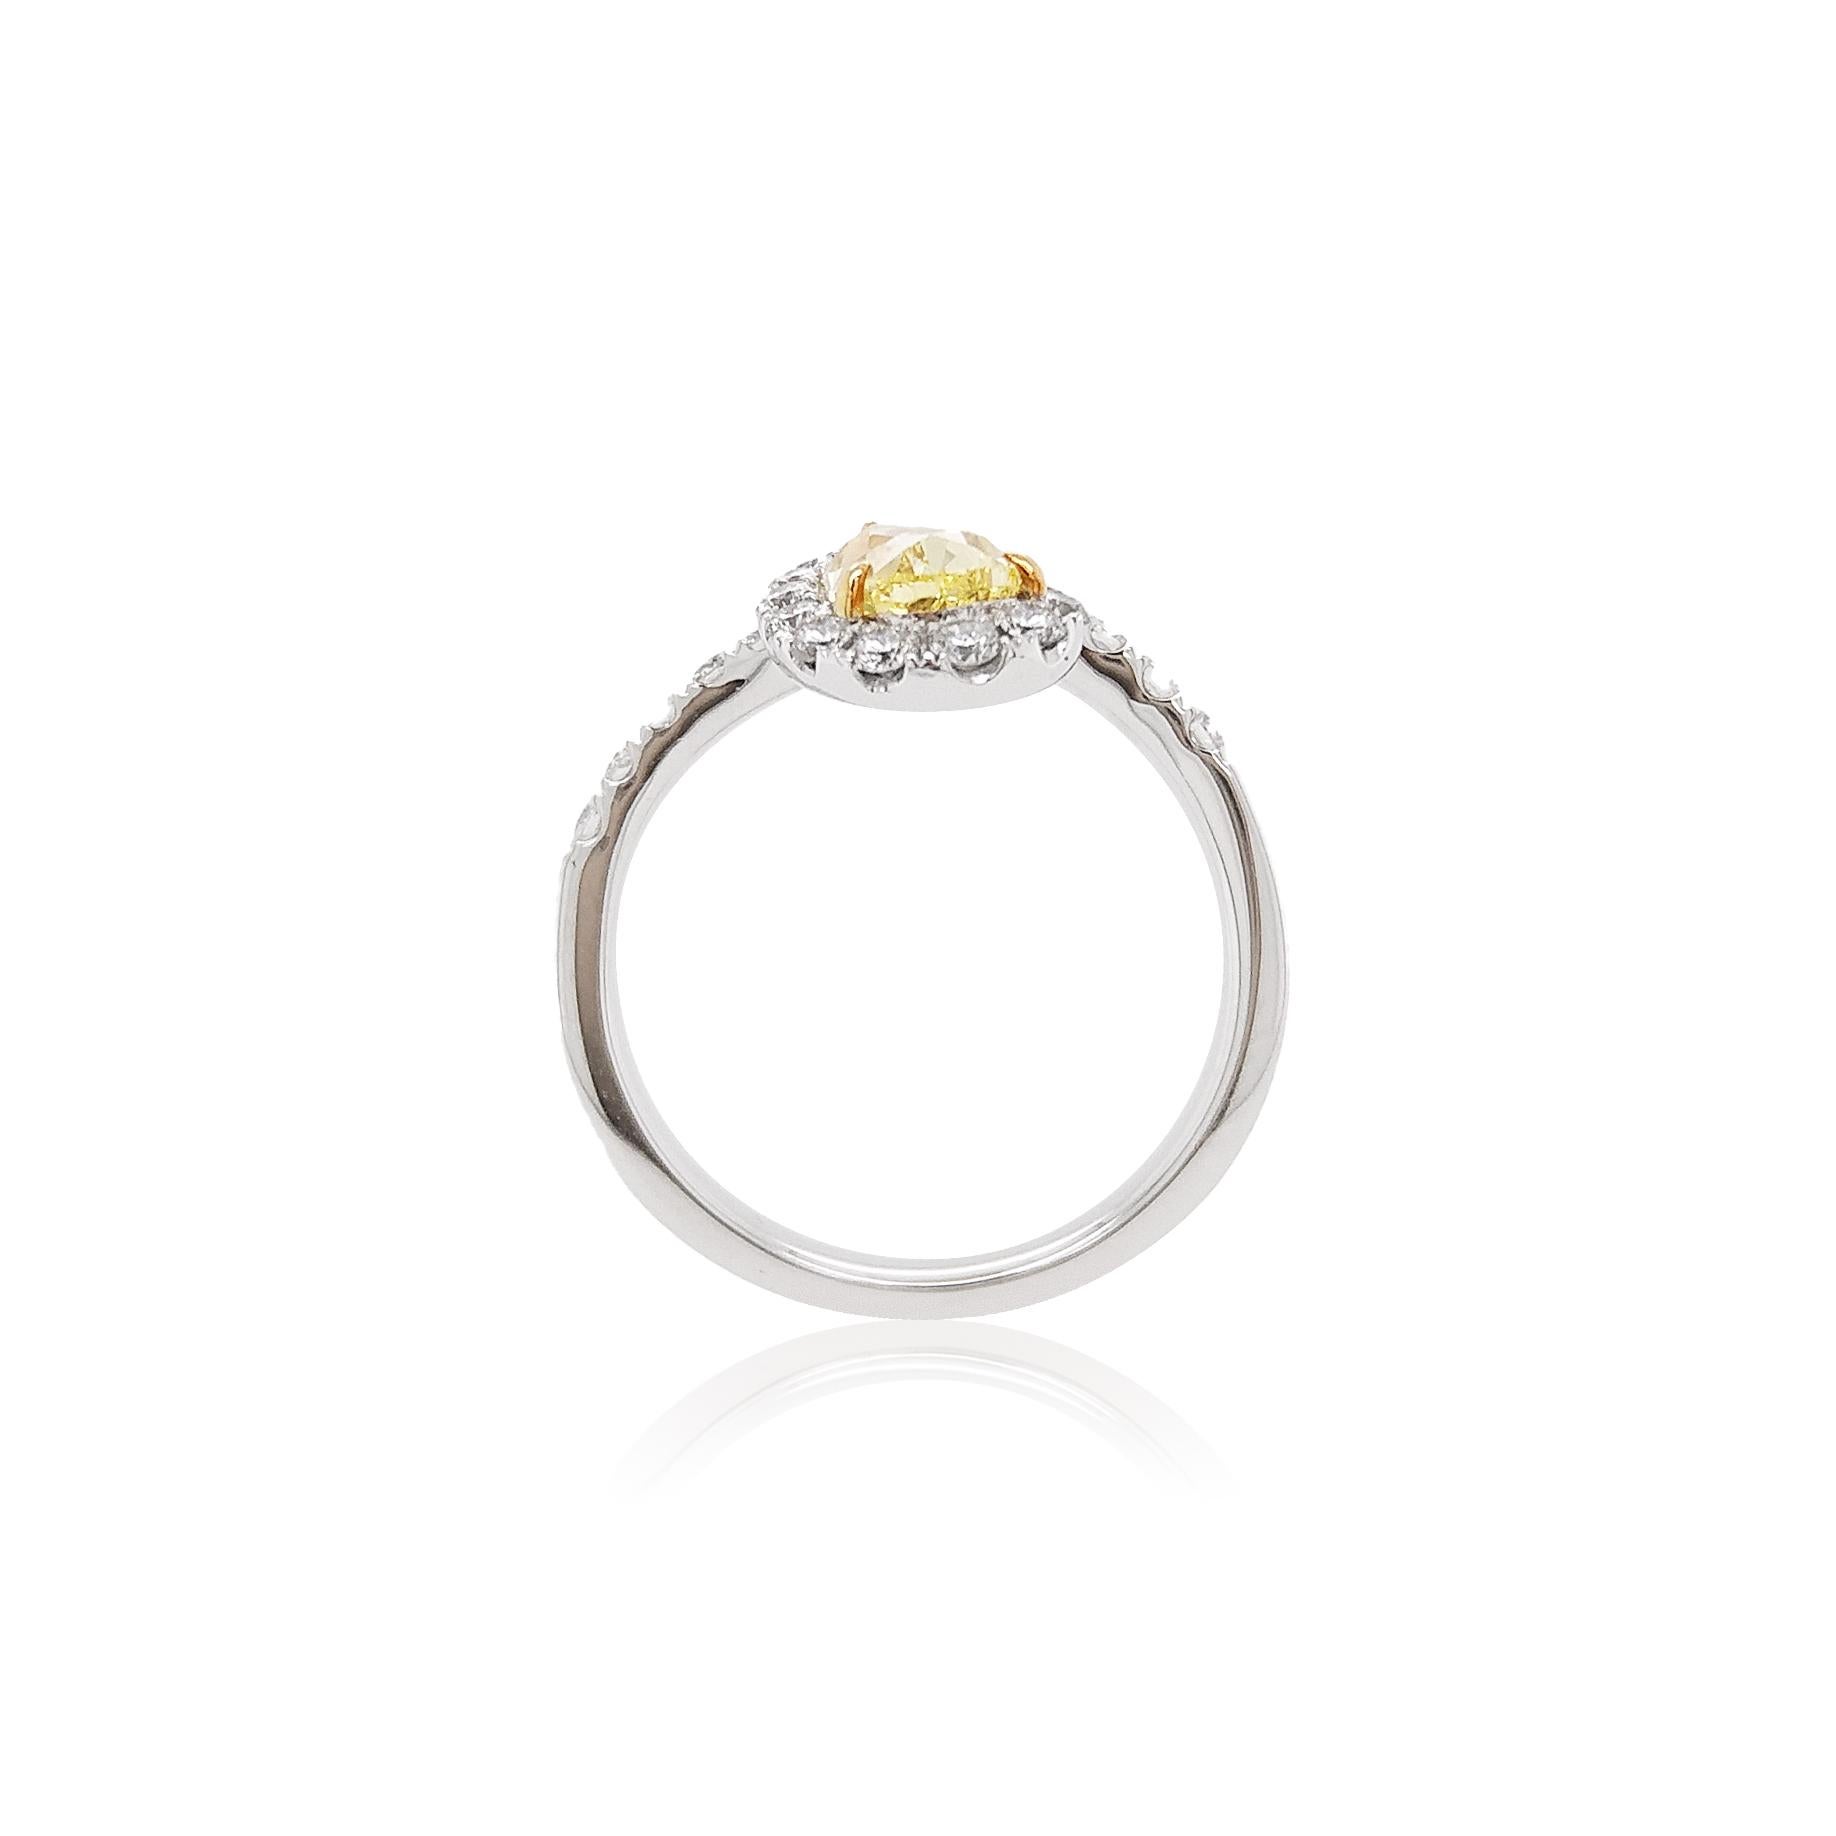 This elegant ring features a lustrous Fancy Intense Yellow Diamond surrounded by a halo of glistening diamonds, in a design that is fast becoming a modern classic. Set in platinum to enrich the lustre and the bright sparkle of the diamonds, this